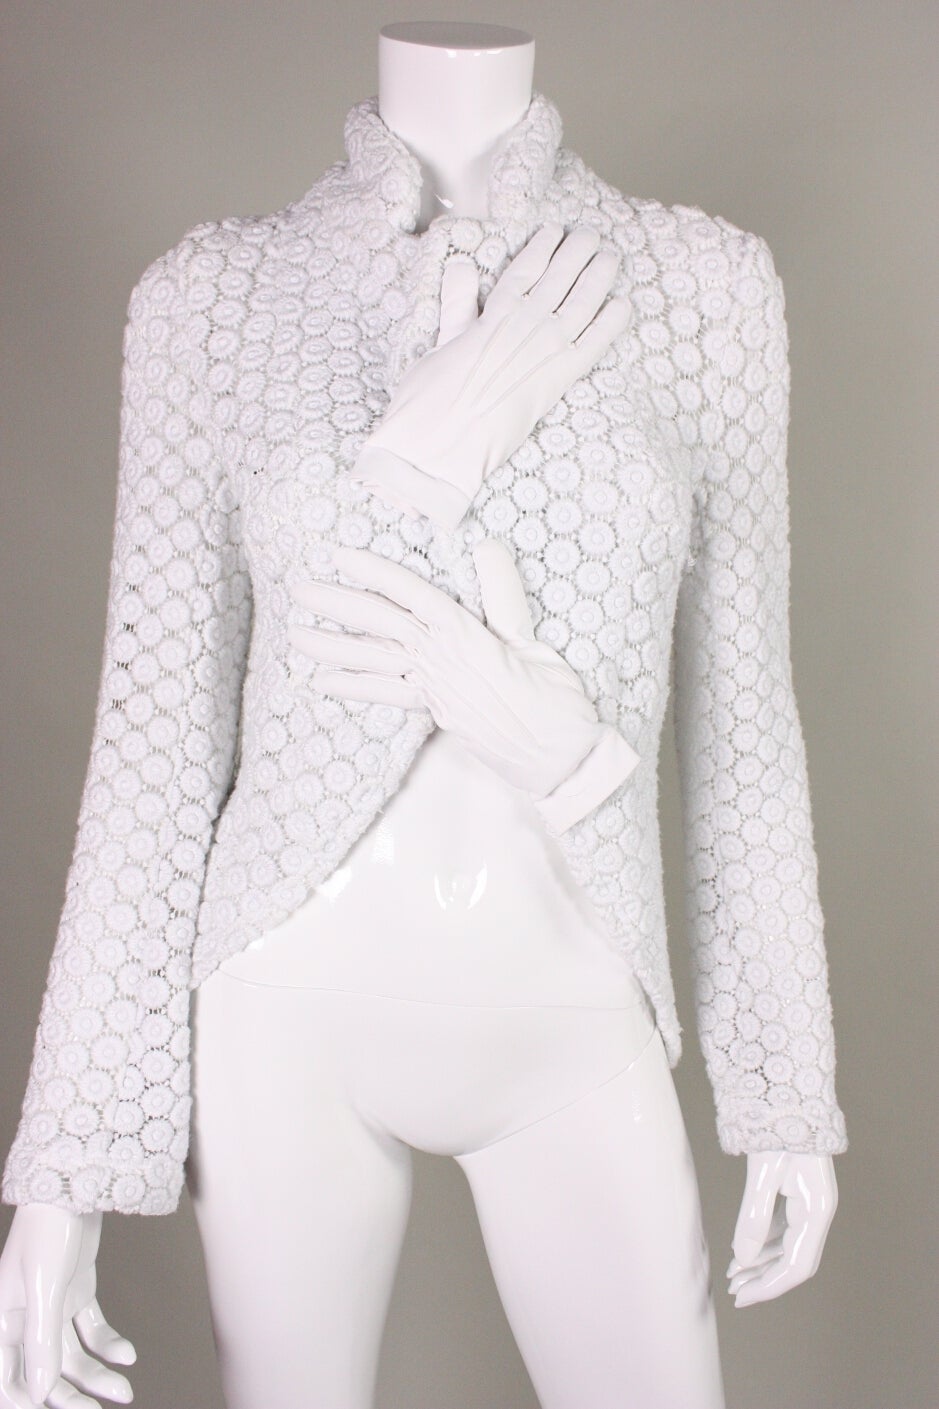 Amazing sweater from Comme des Garçons circa 2007 is made of a white open weave knit.  It features padded hands crossing over the front of the chest.  Stand collar.  Cutaway front.  Center back vent.  Unlined.  No closures.

Labeled a size Medium.